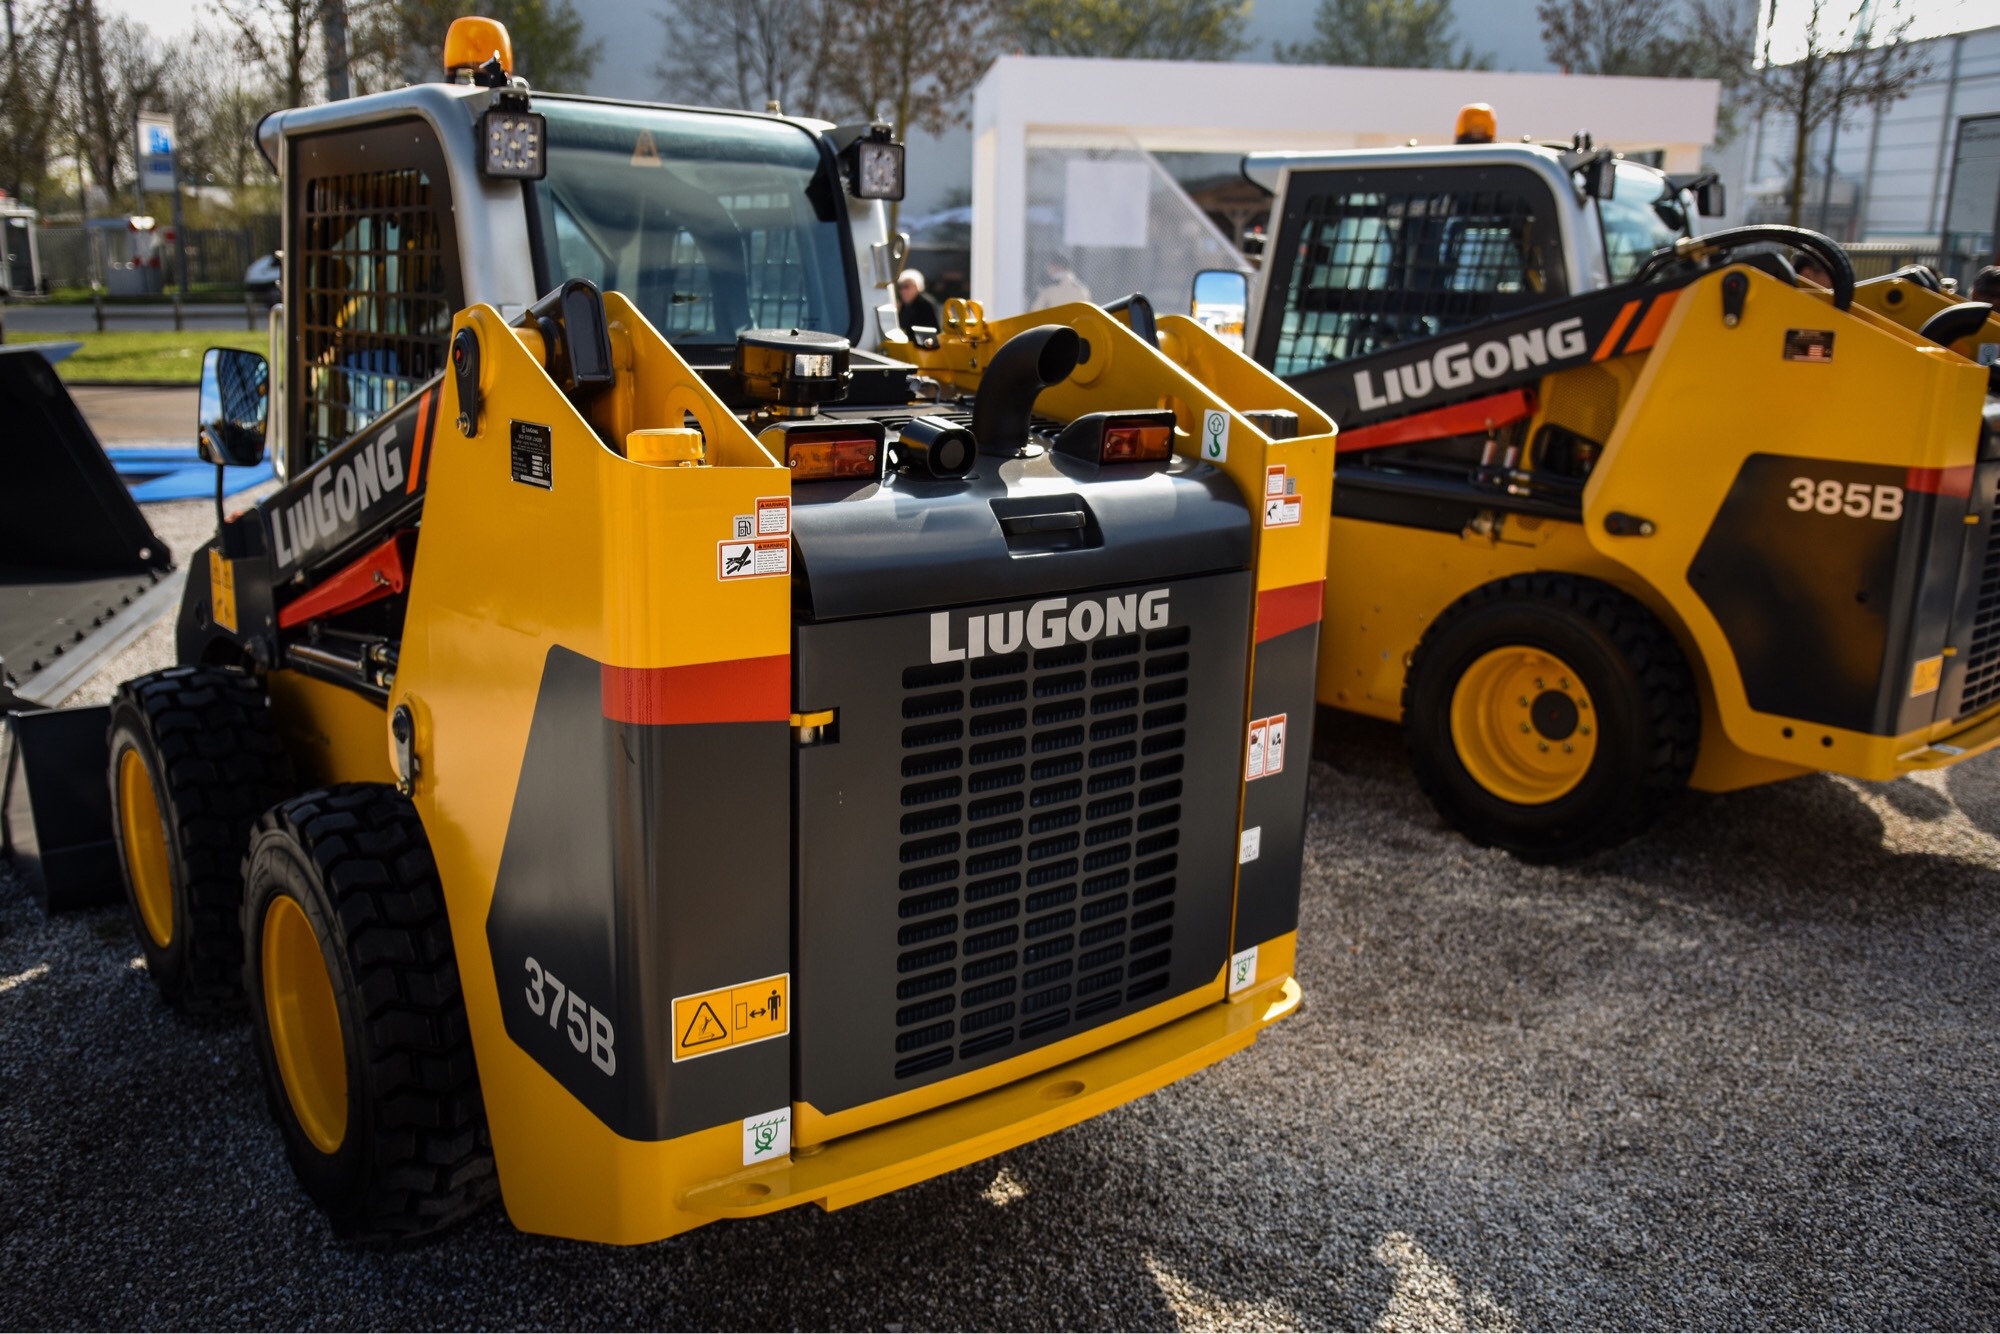 LiuGong Skid Steer Backgrounds, Compatible - PC, Mobile, Gadgets| 2000x1334 px